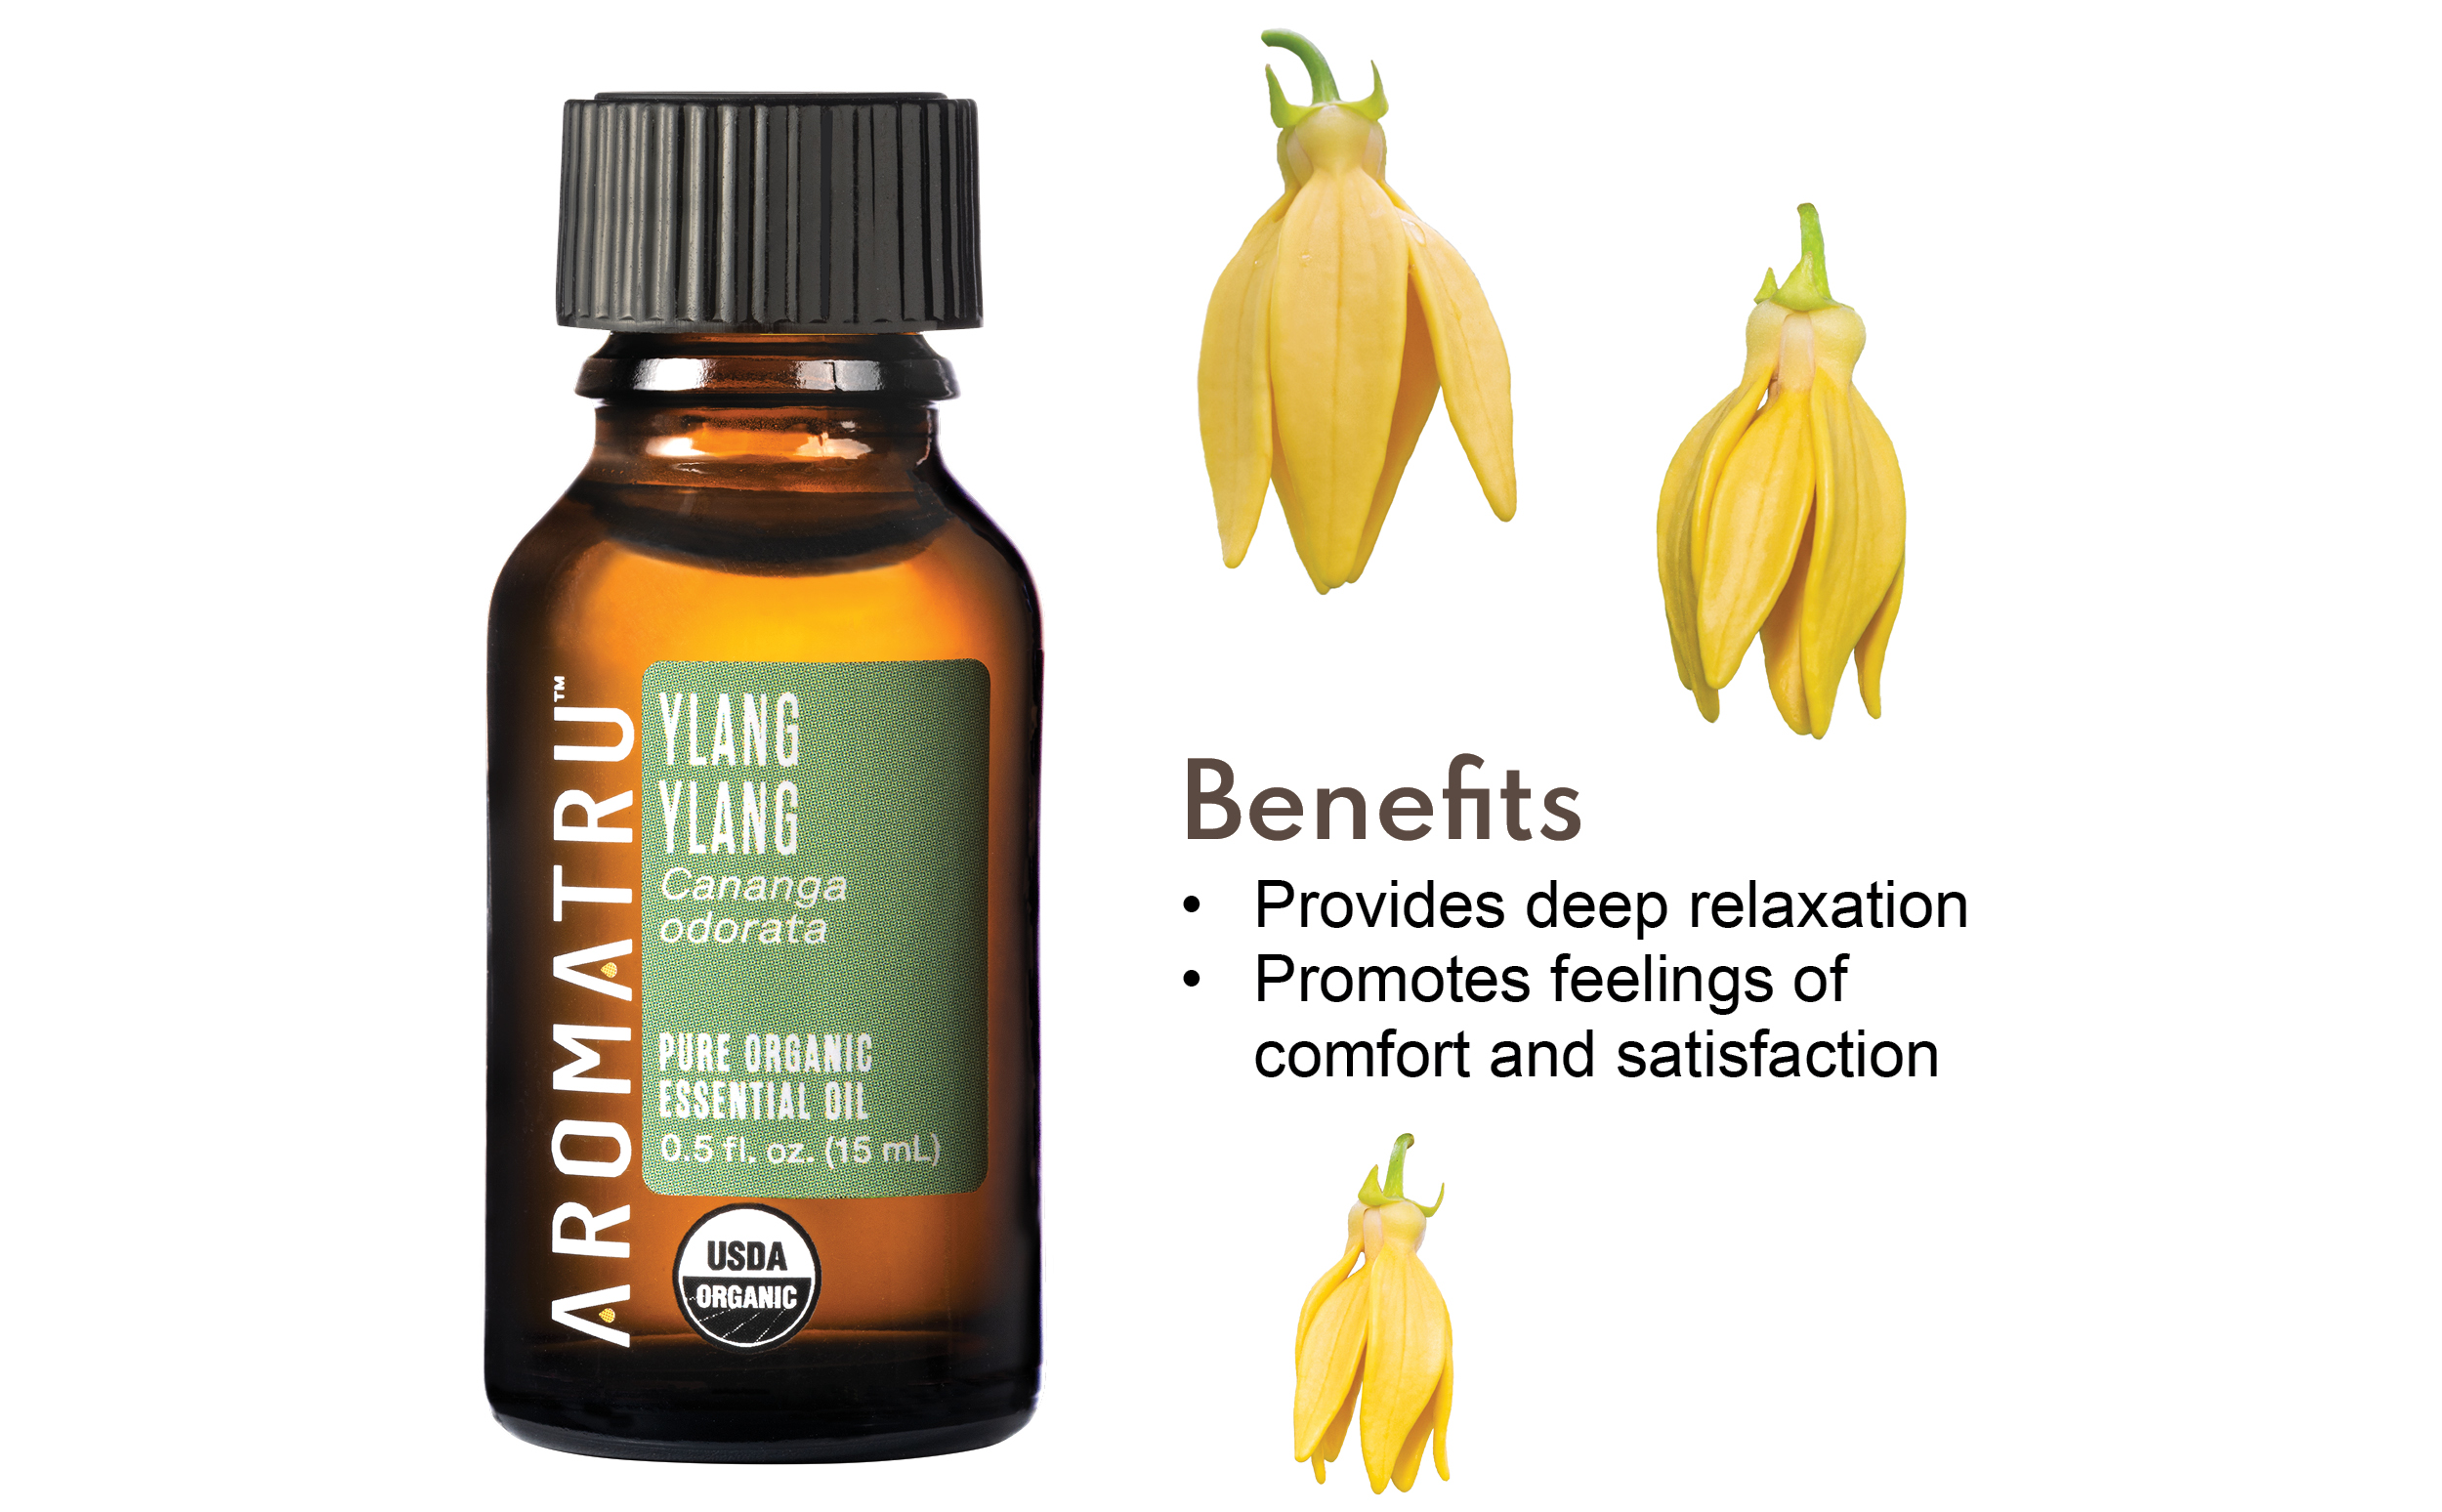 Ylang Ylang: What Does it Smell Like?